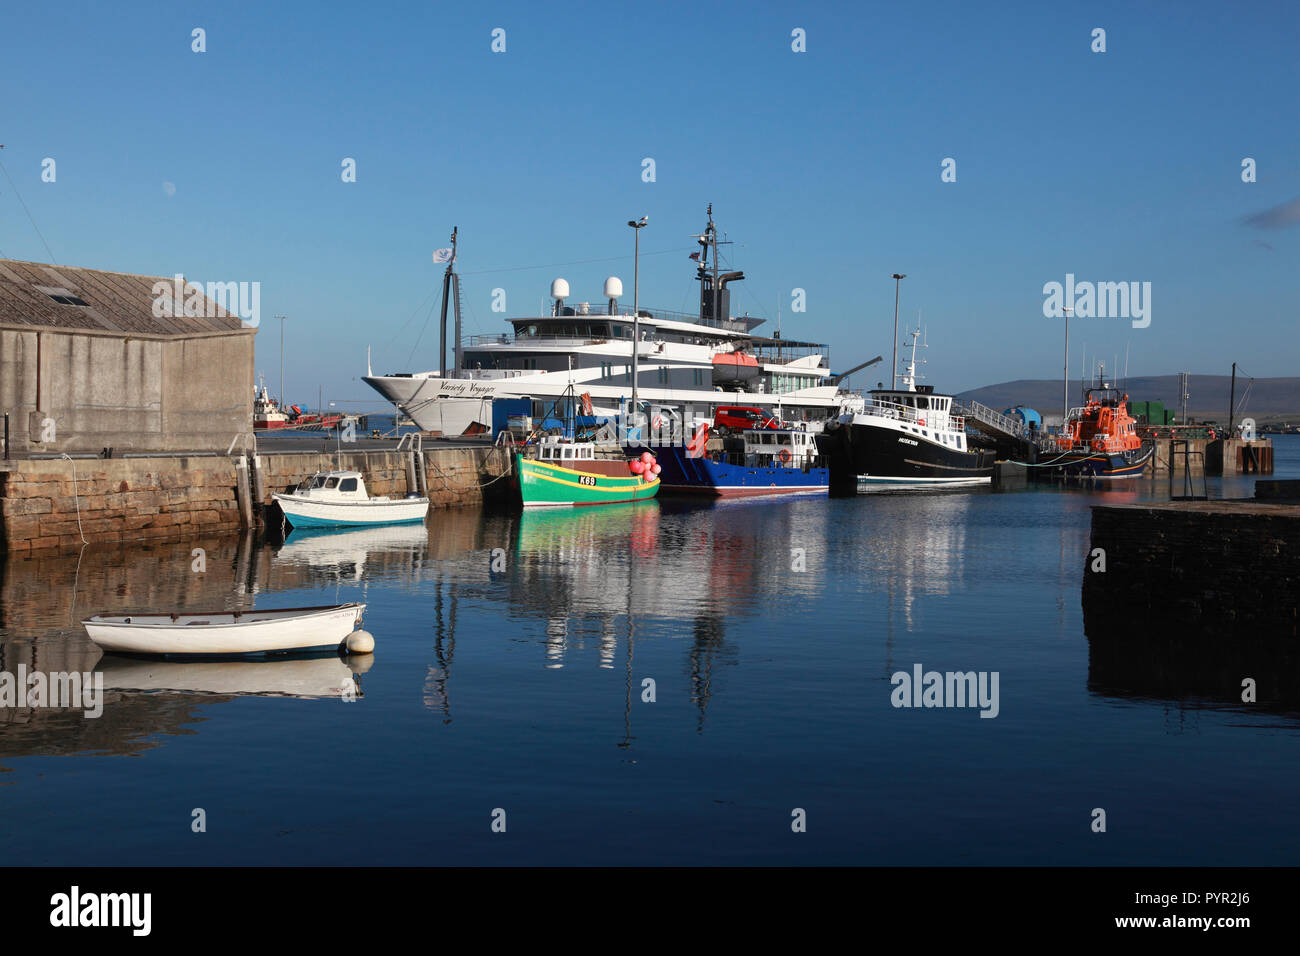 The harbour in Stromness, Orkney with fishing boats, the lifeboat and the passenger cruise ship, Variety Voyager Stock Photo